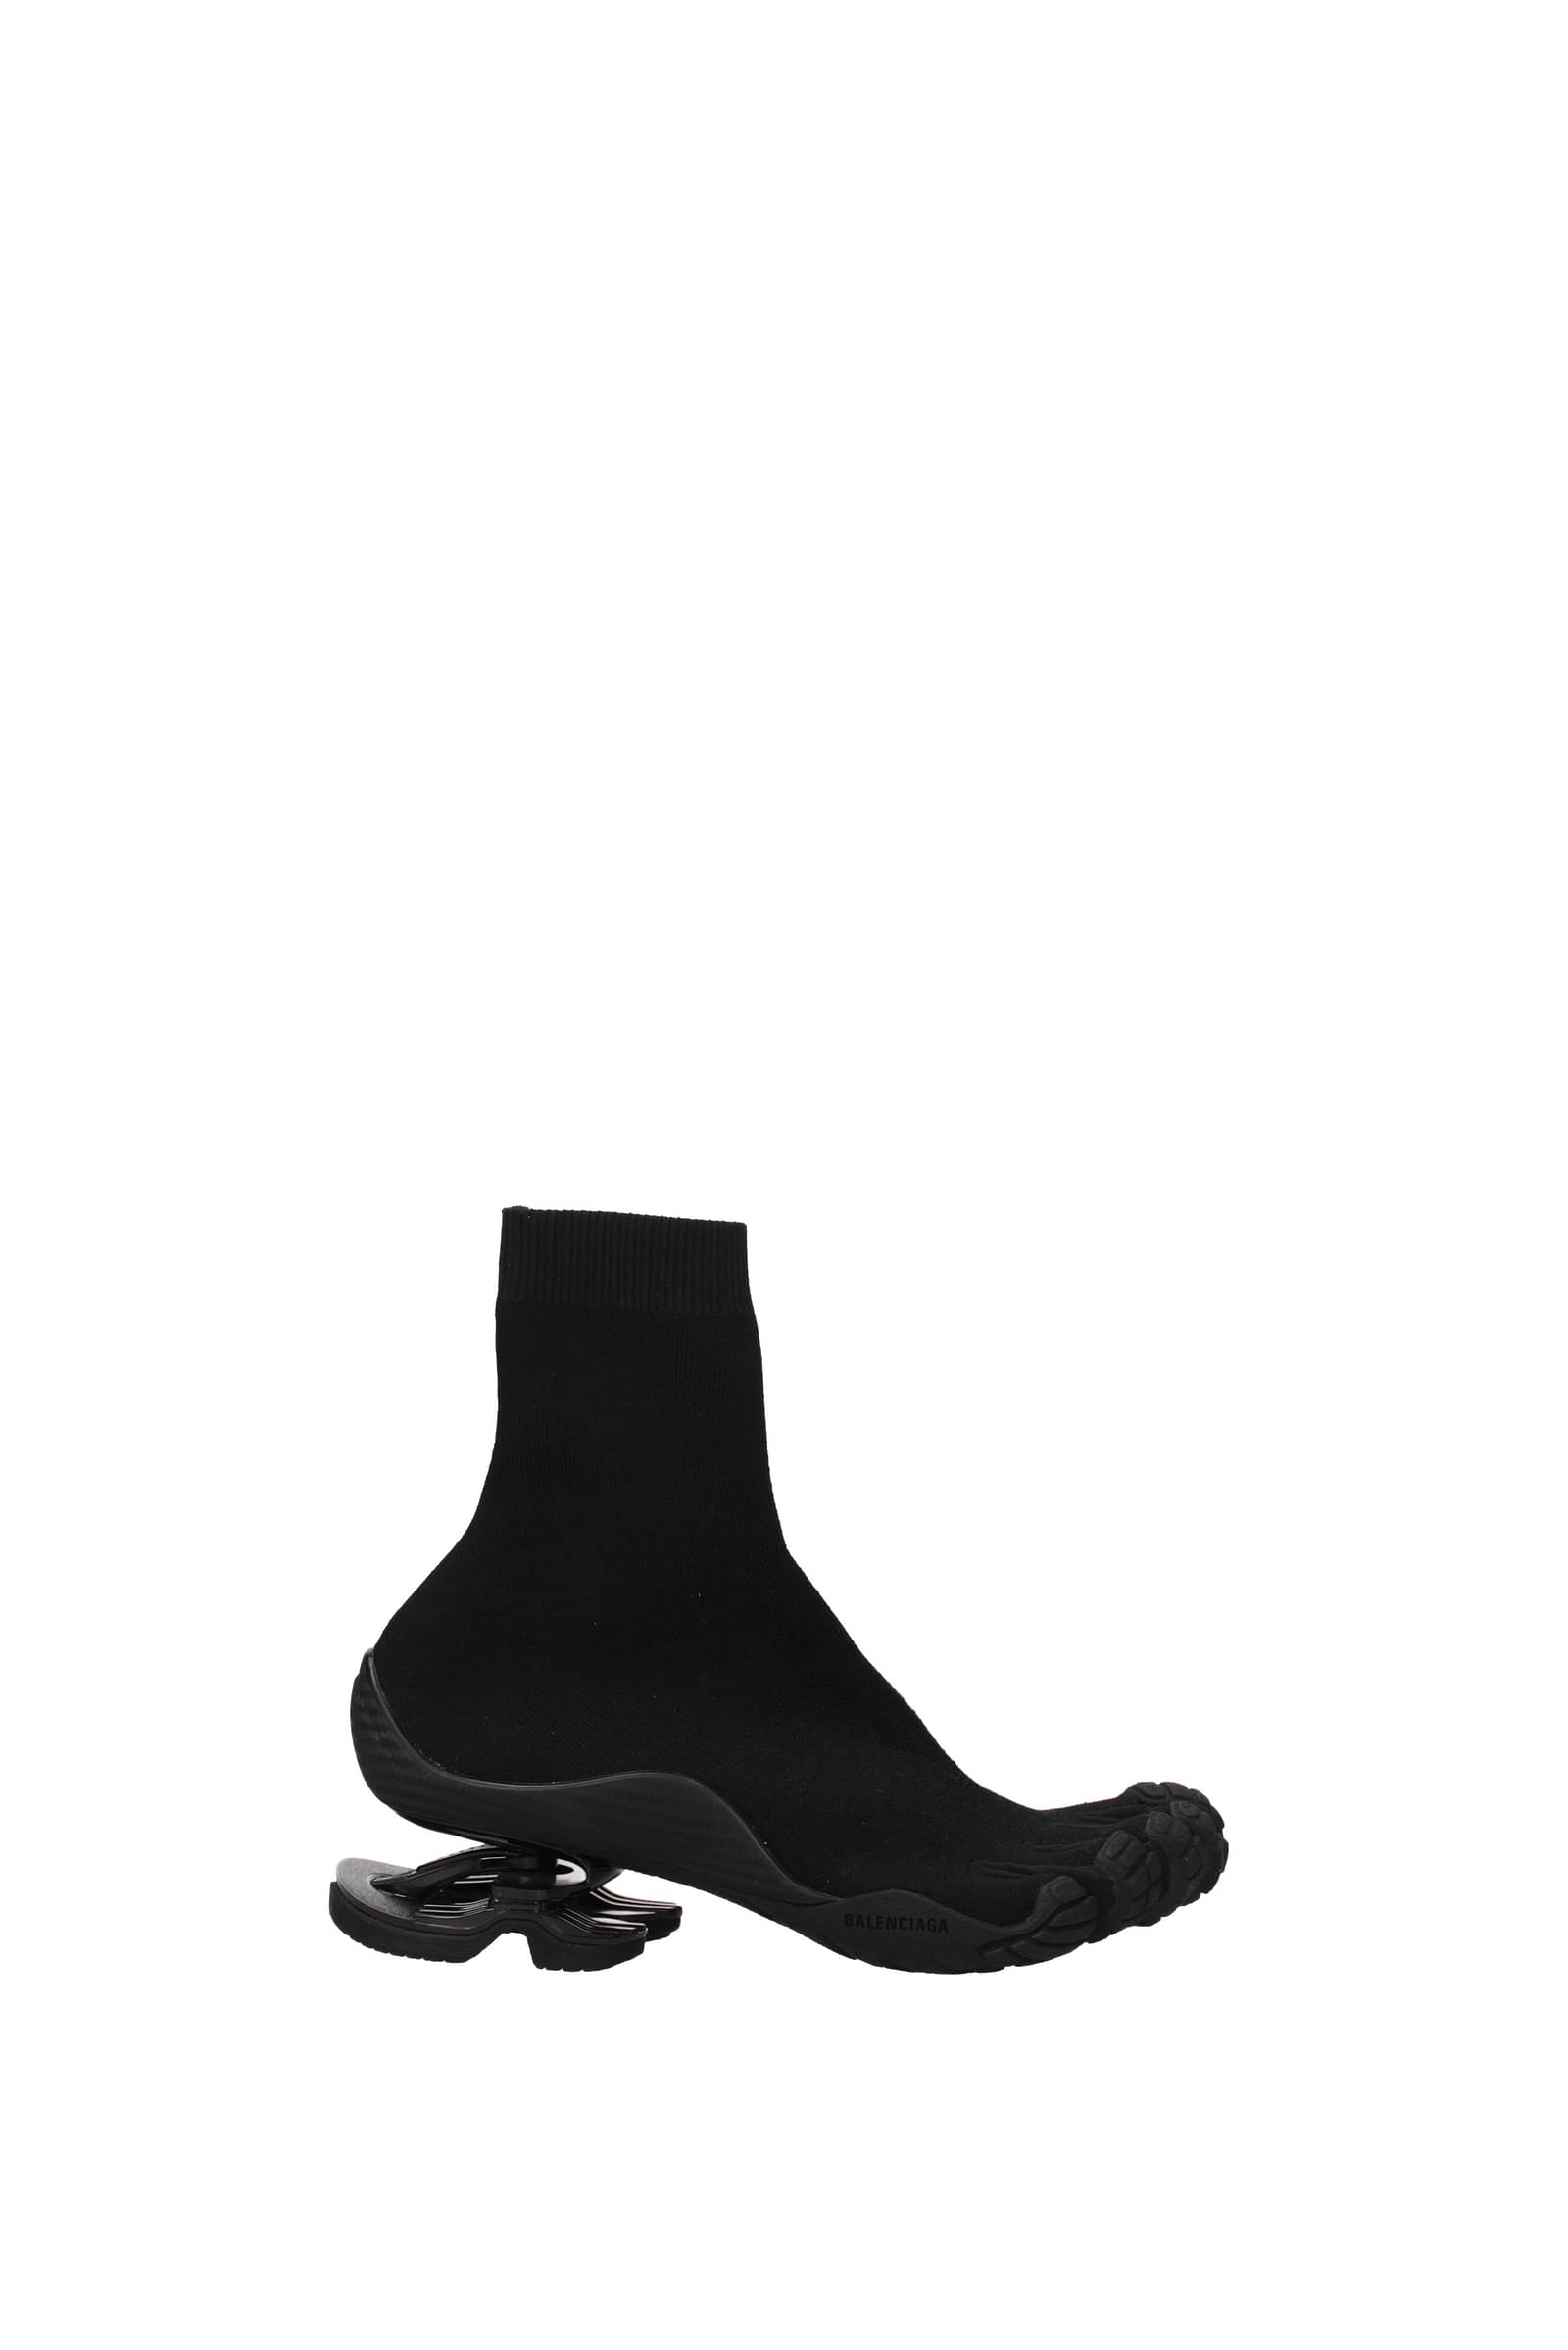 Balenciaga Ankle boots for women  Buy or Sell your Designer Shoes   Vestiaire Collective